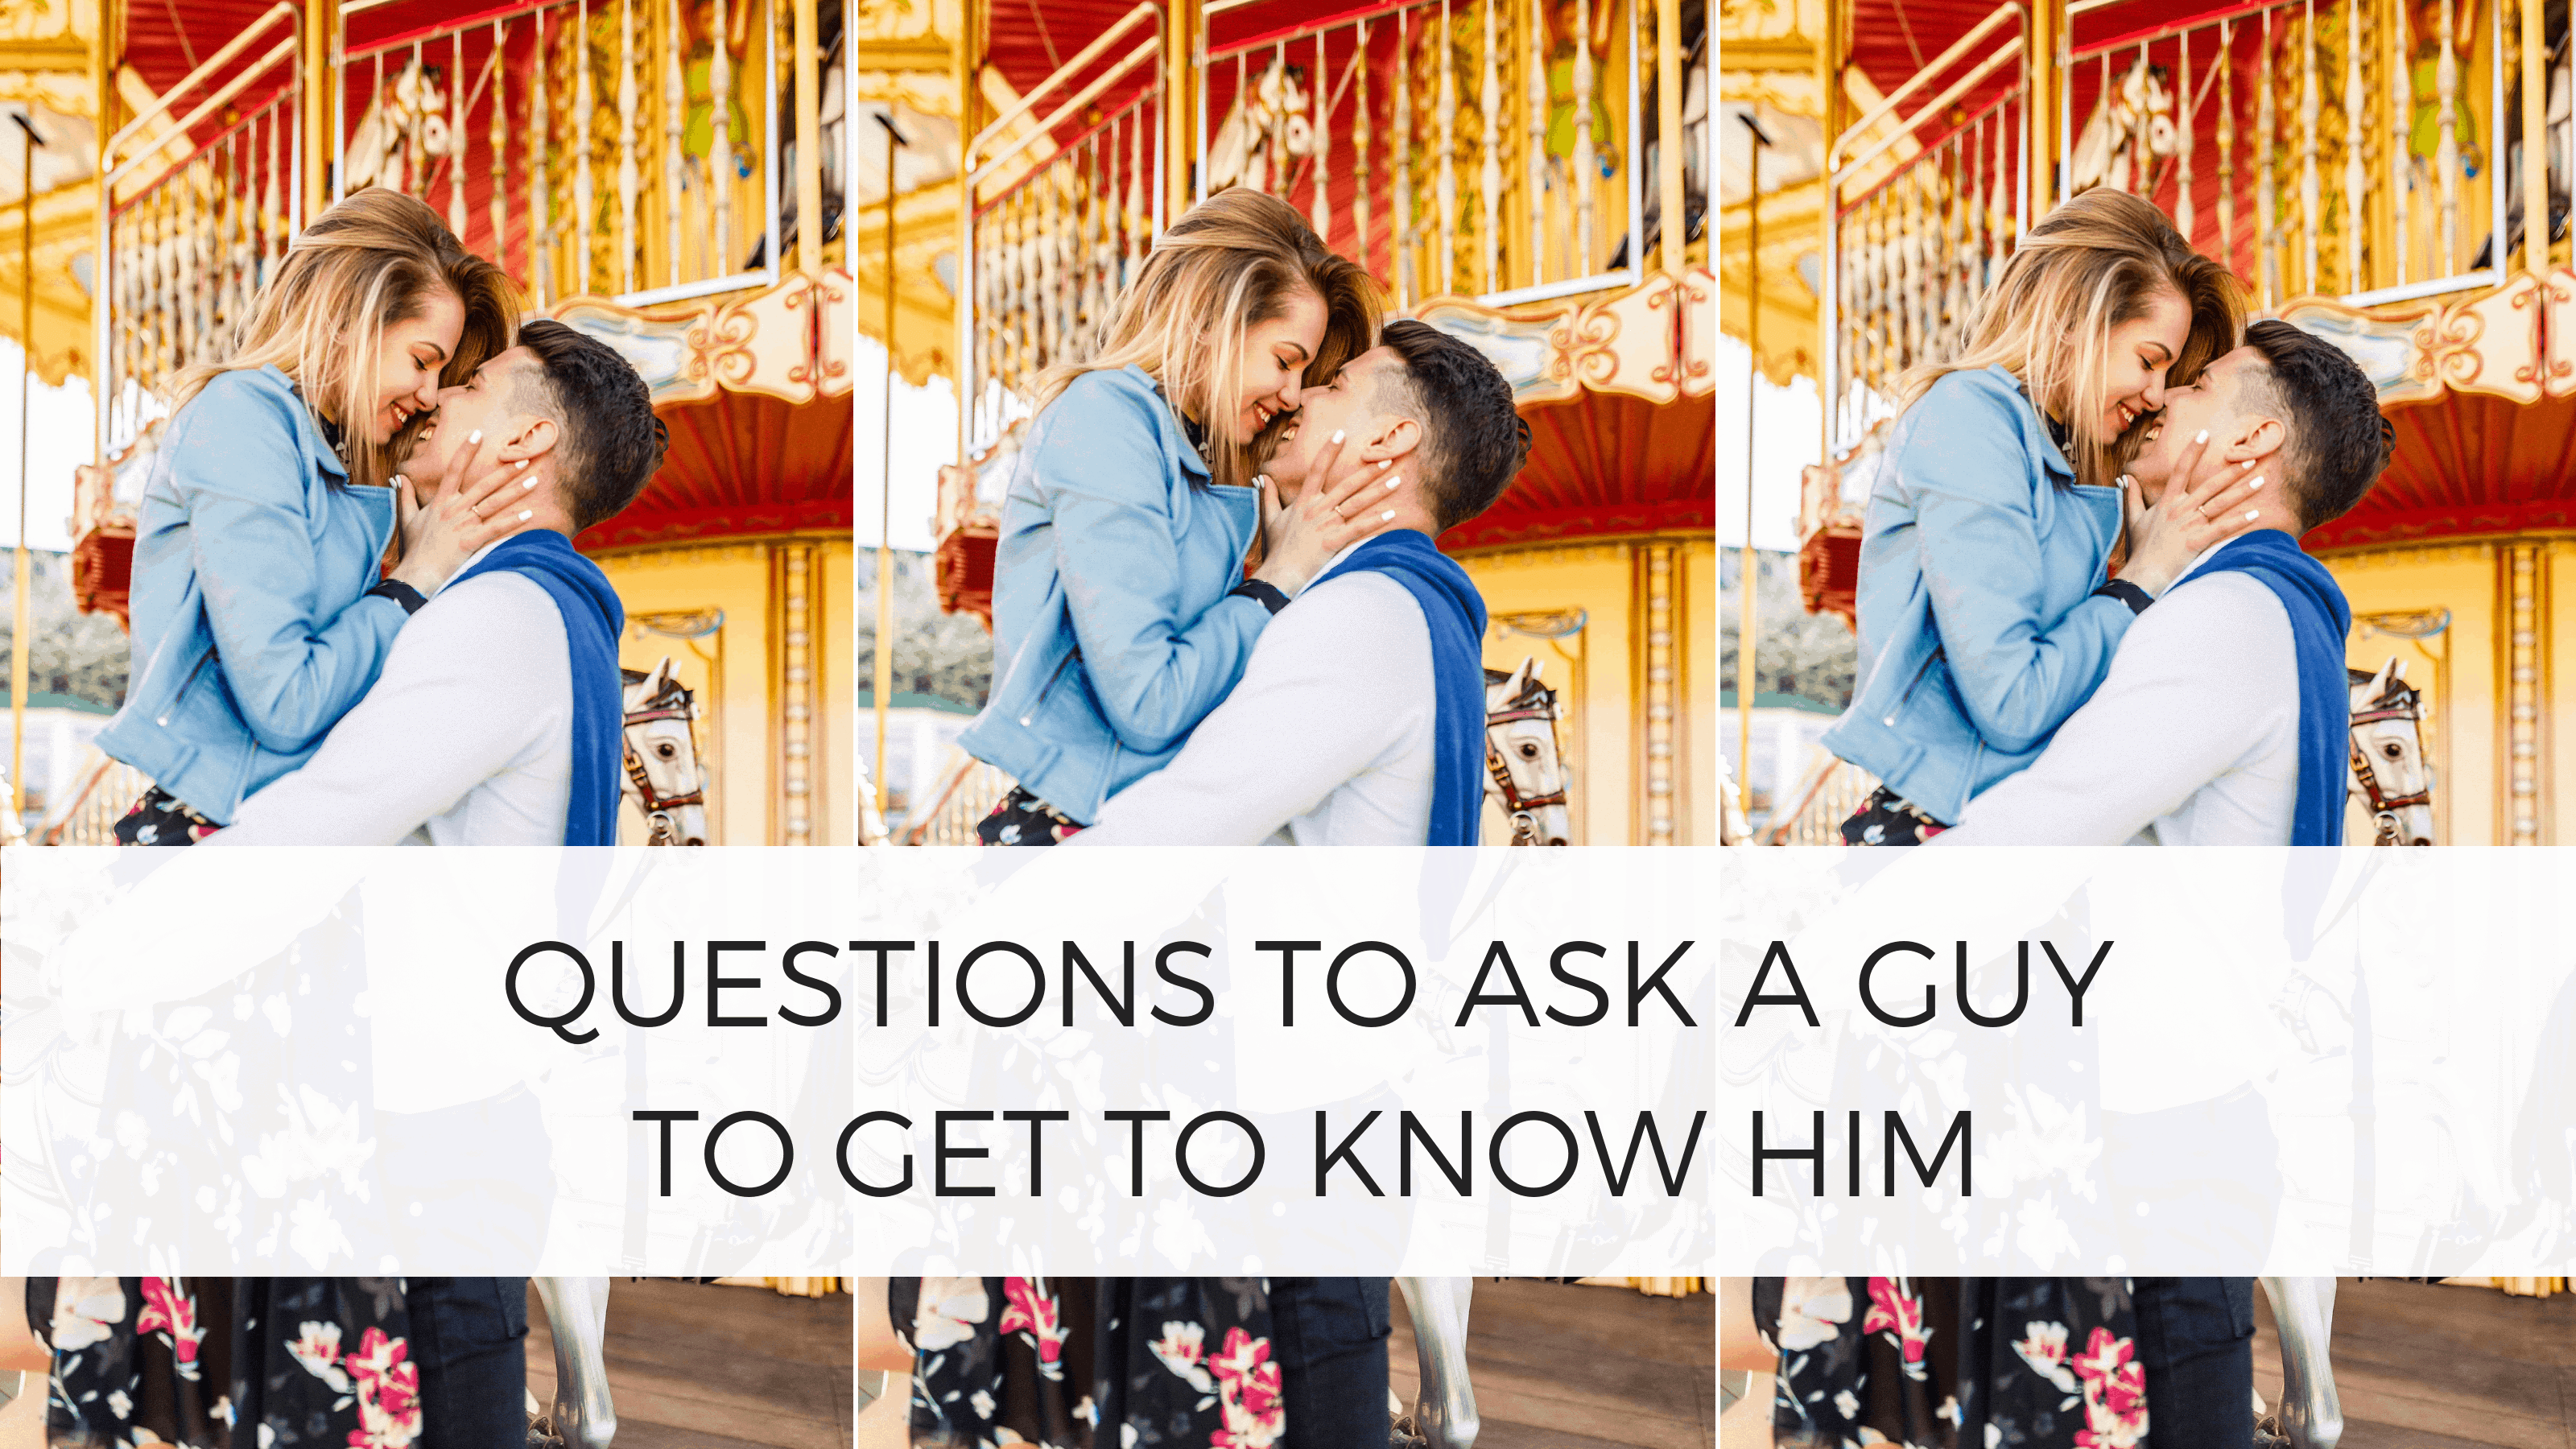 Questions for getting to know a guy